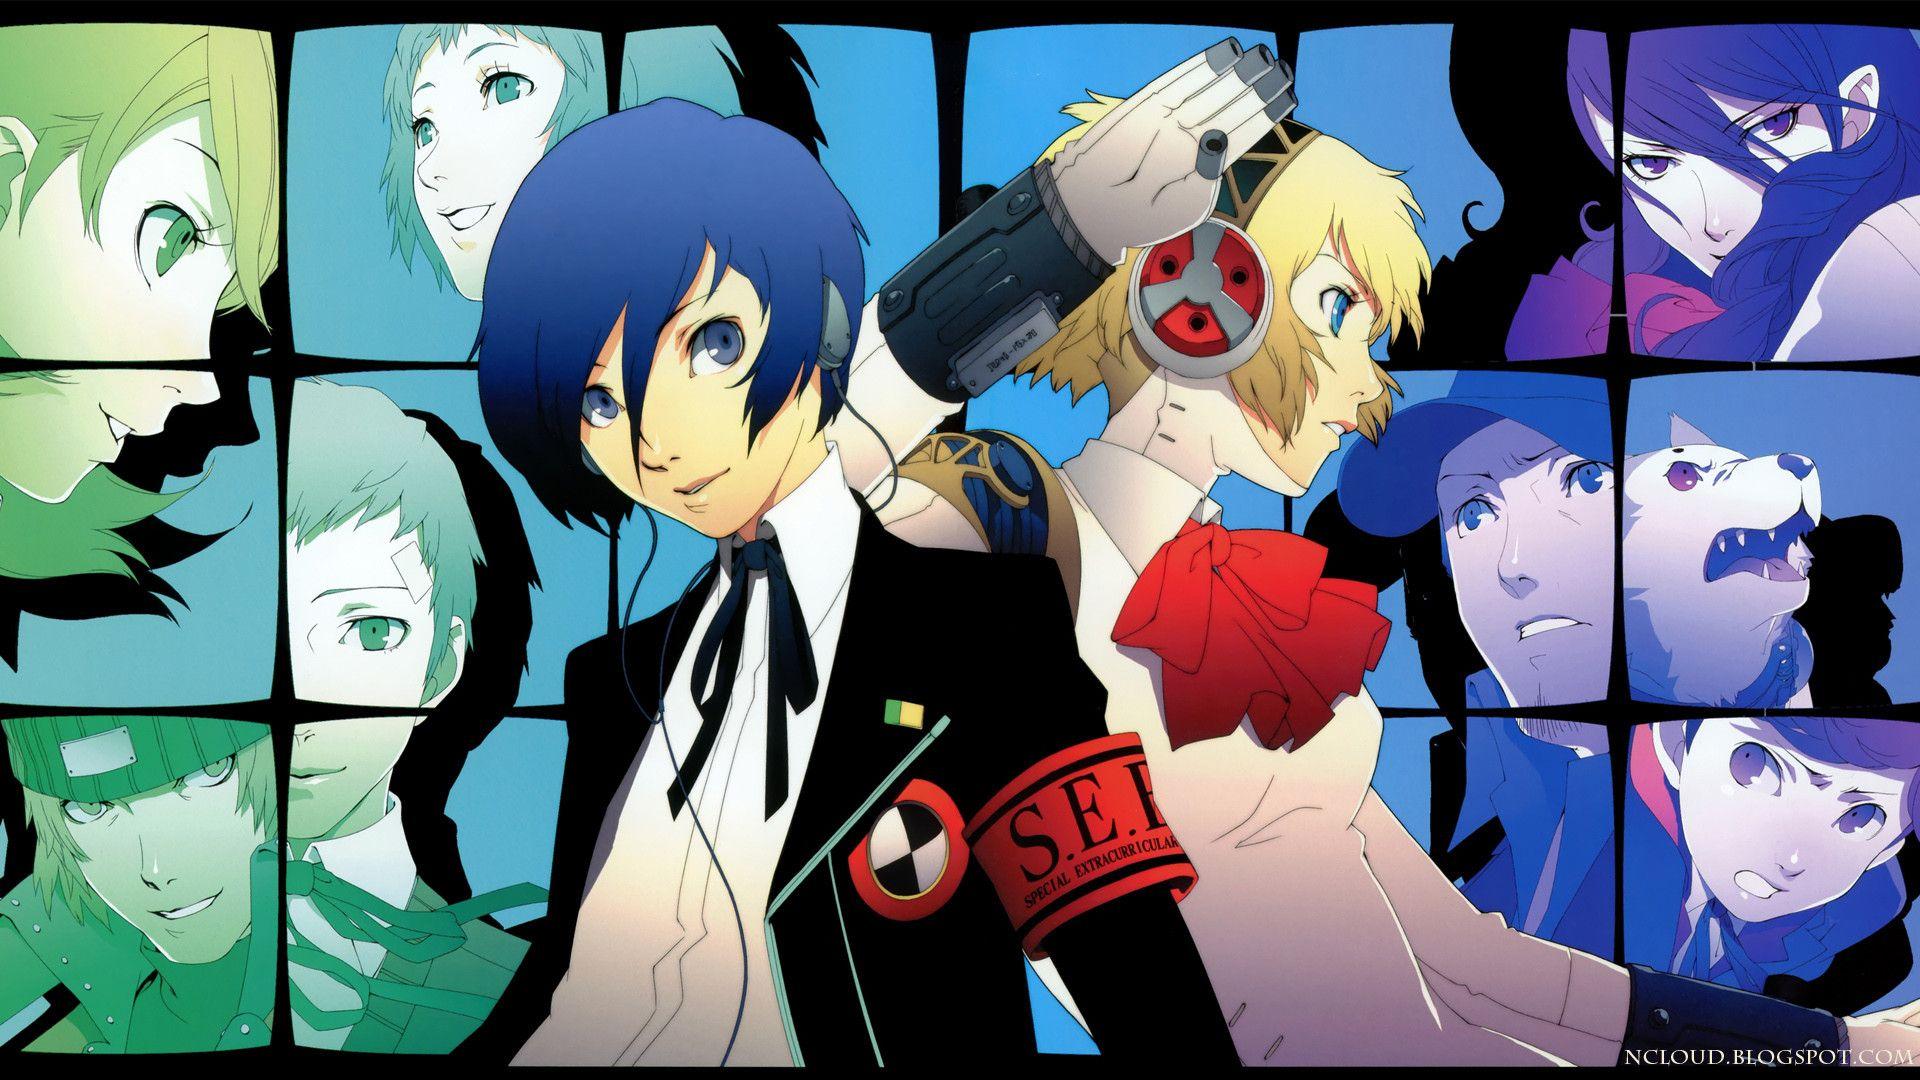 persona 3 fes  Wallpapers